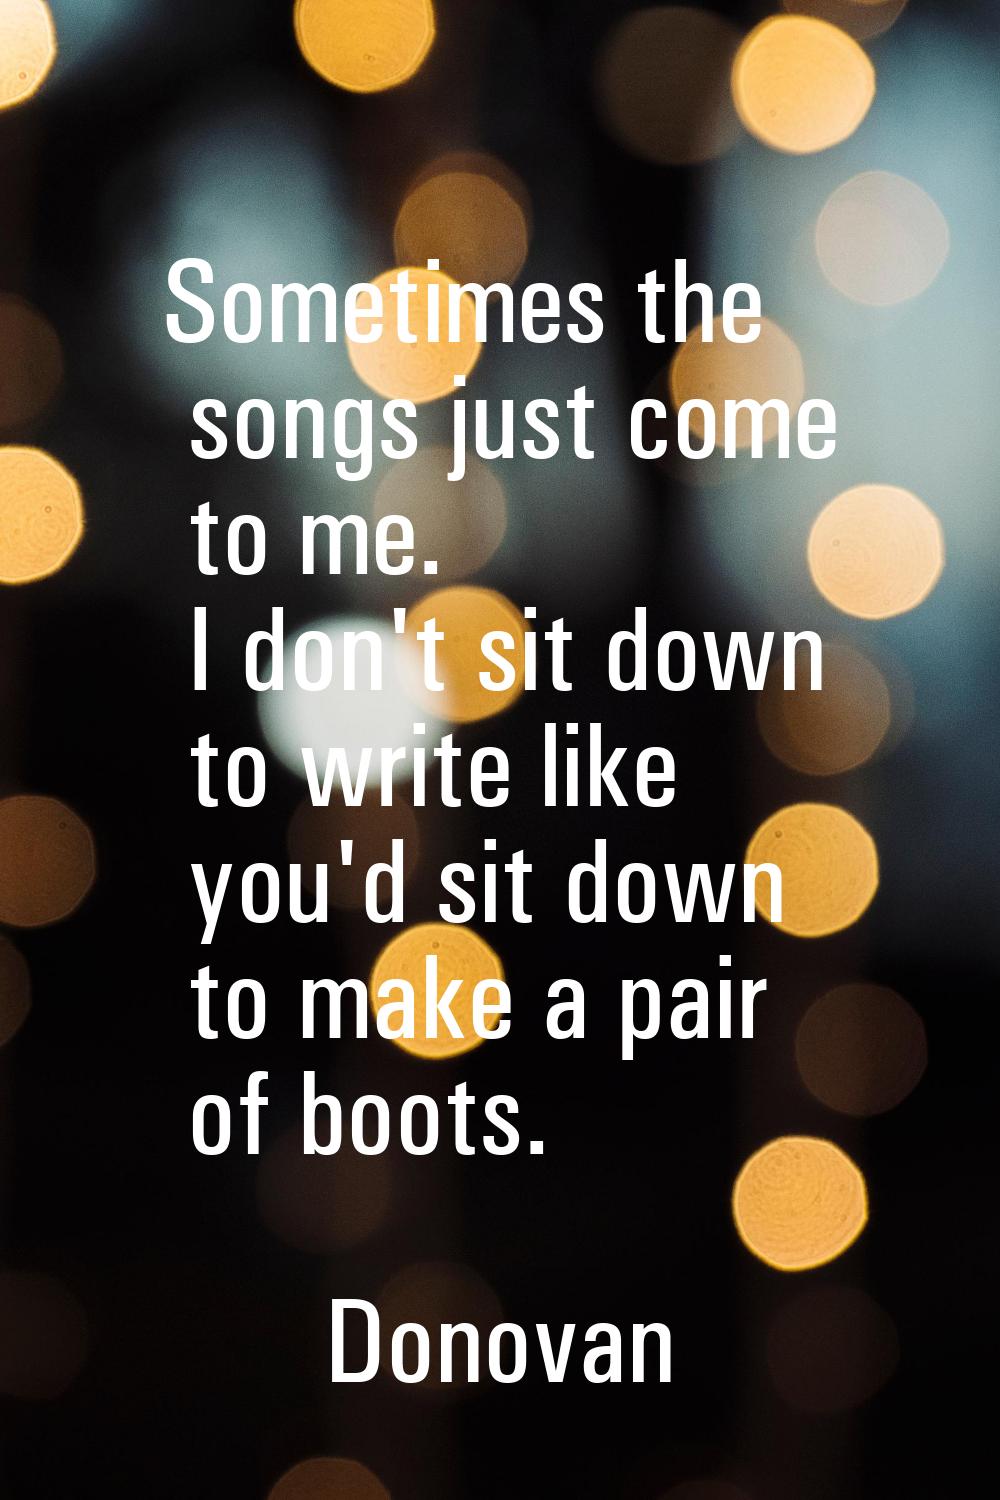 Sometimes the songs just come to me. I don't sit down to write like you'd sit down to make a pair o